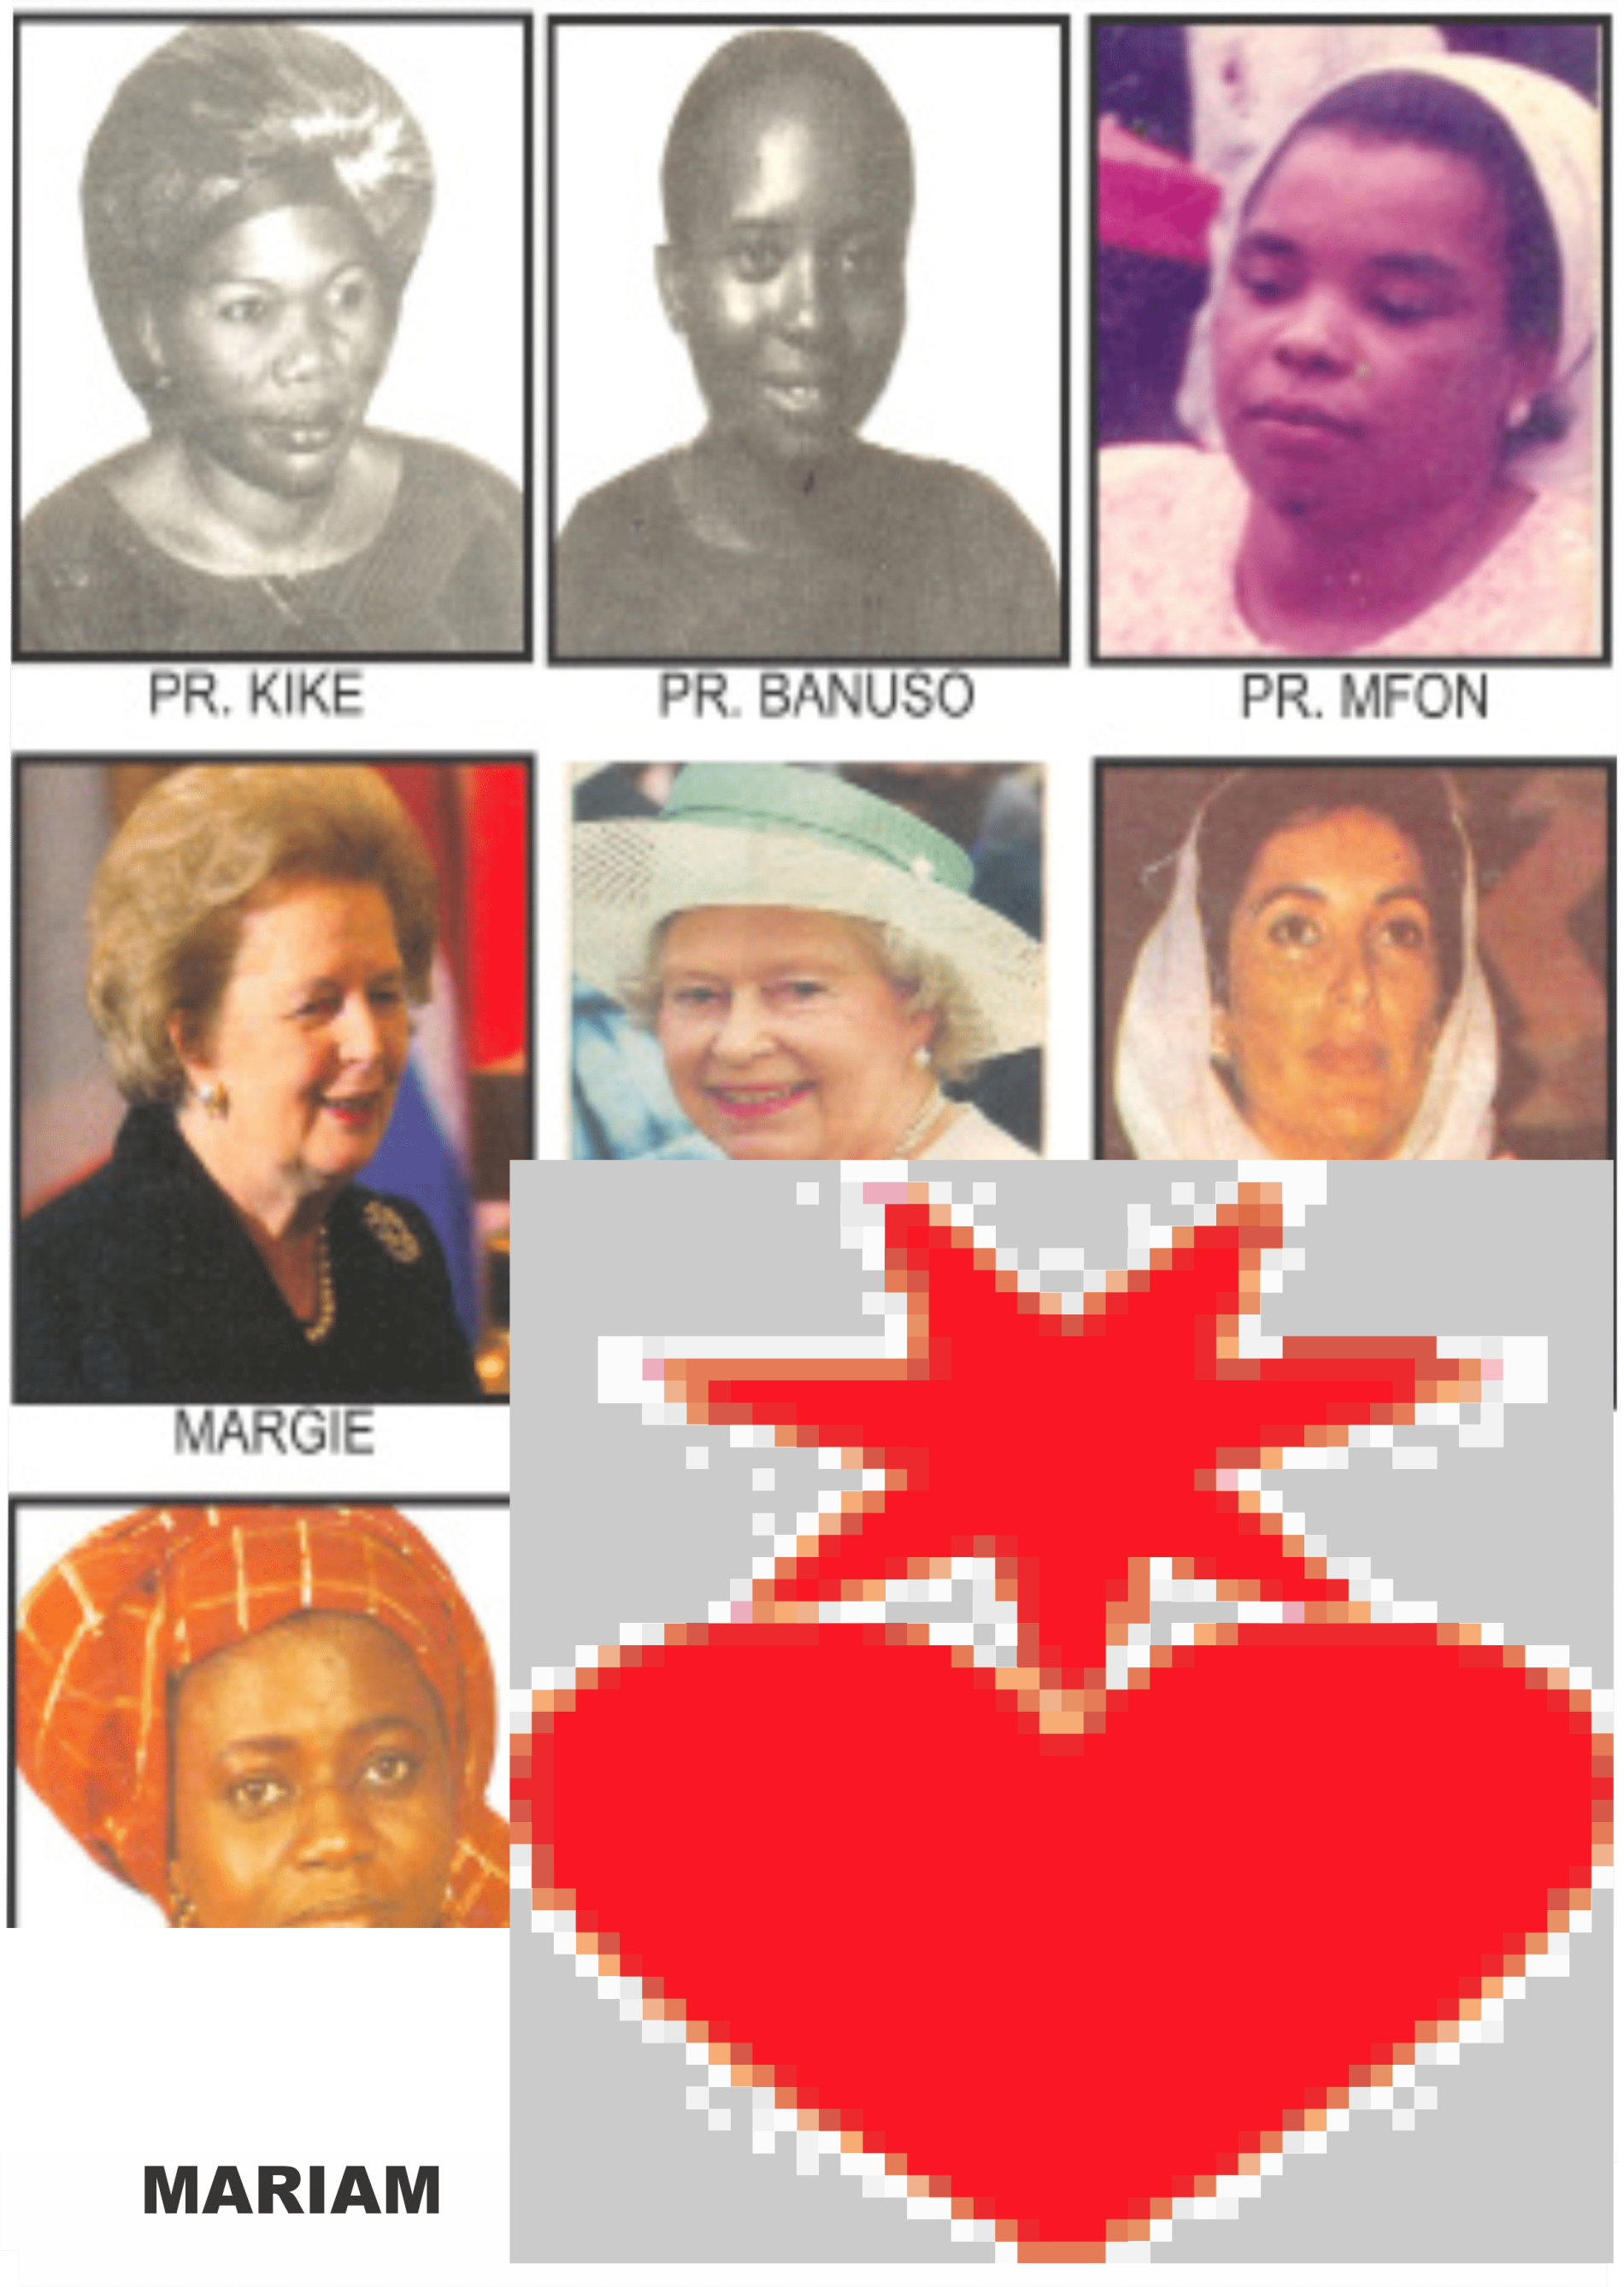 THE NINE MOST POWERFUL WOMEN OF VALOUR